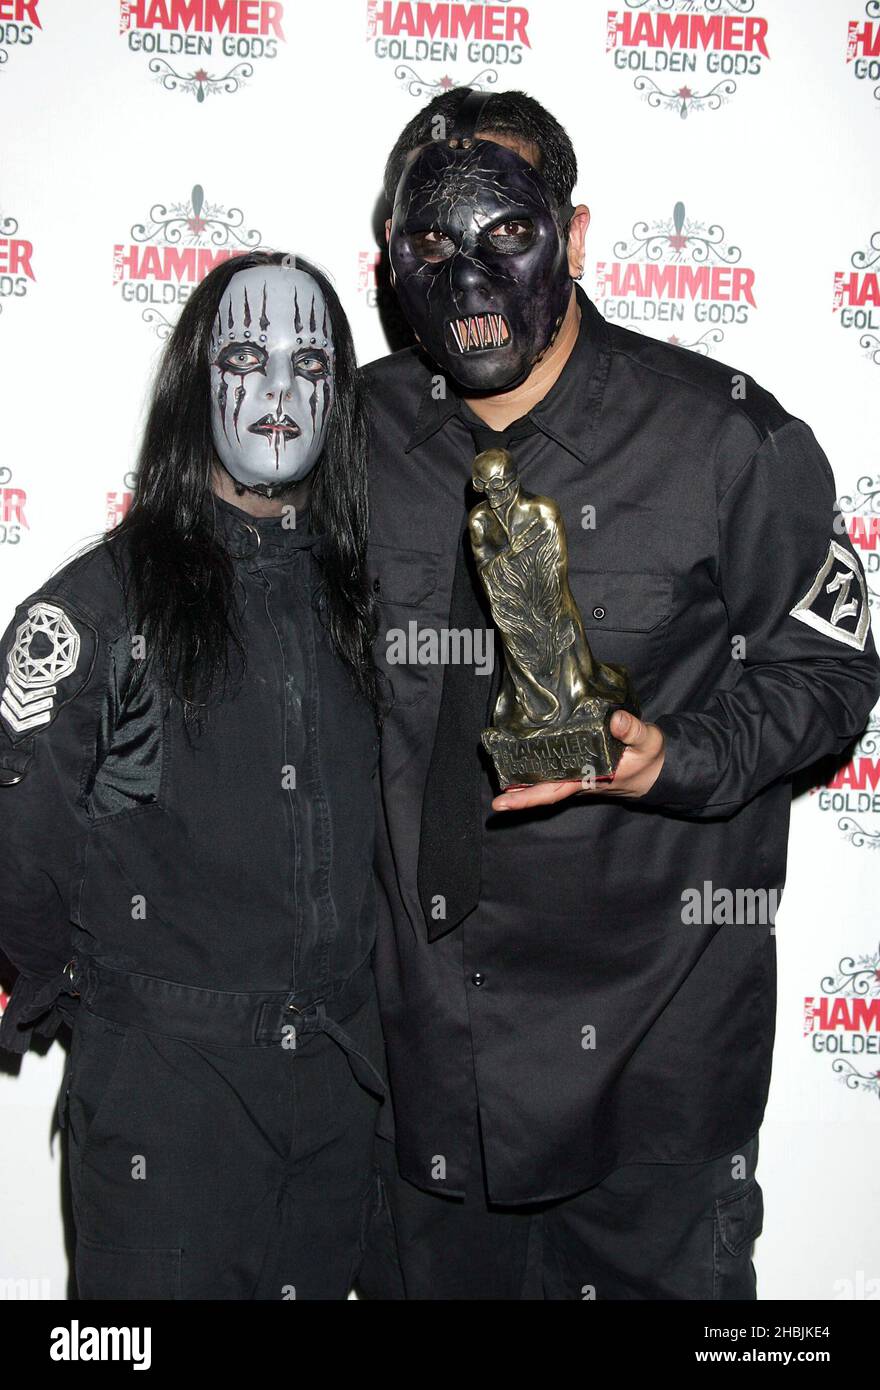 Joey Richardson and Paul Gray of Slipknot pose with Award for Best Live Band in Award Press Room at The Metal Hammer Golden Gods Awards at the The Astoria 13, 2005 in London. Stock Photo